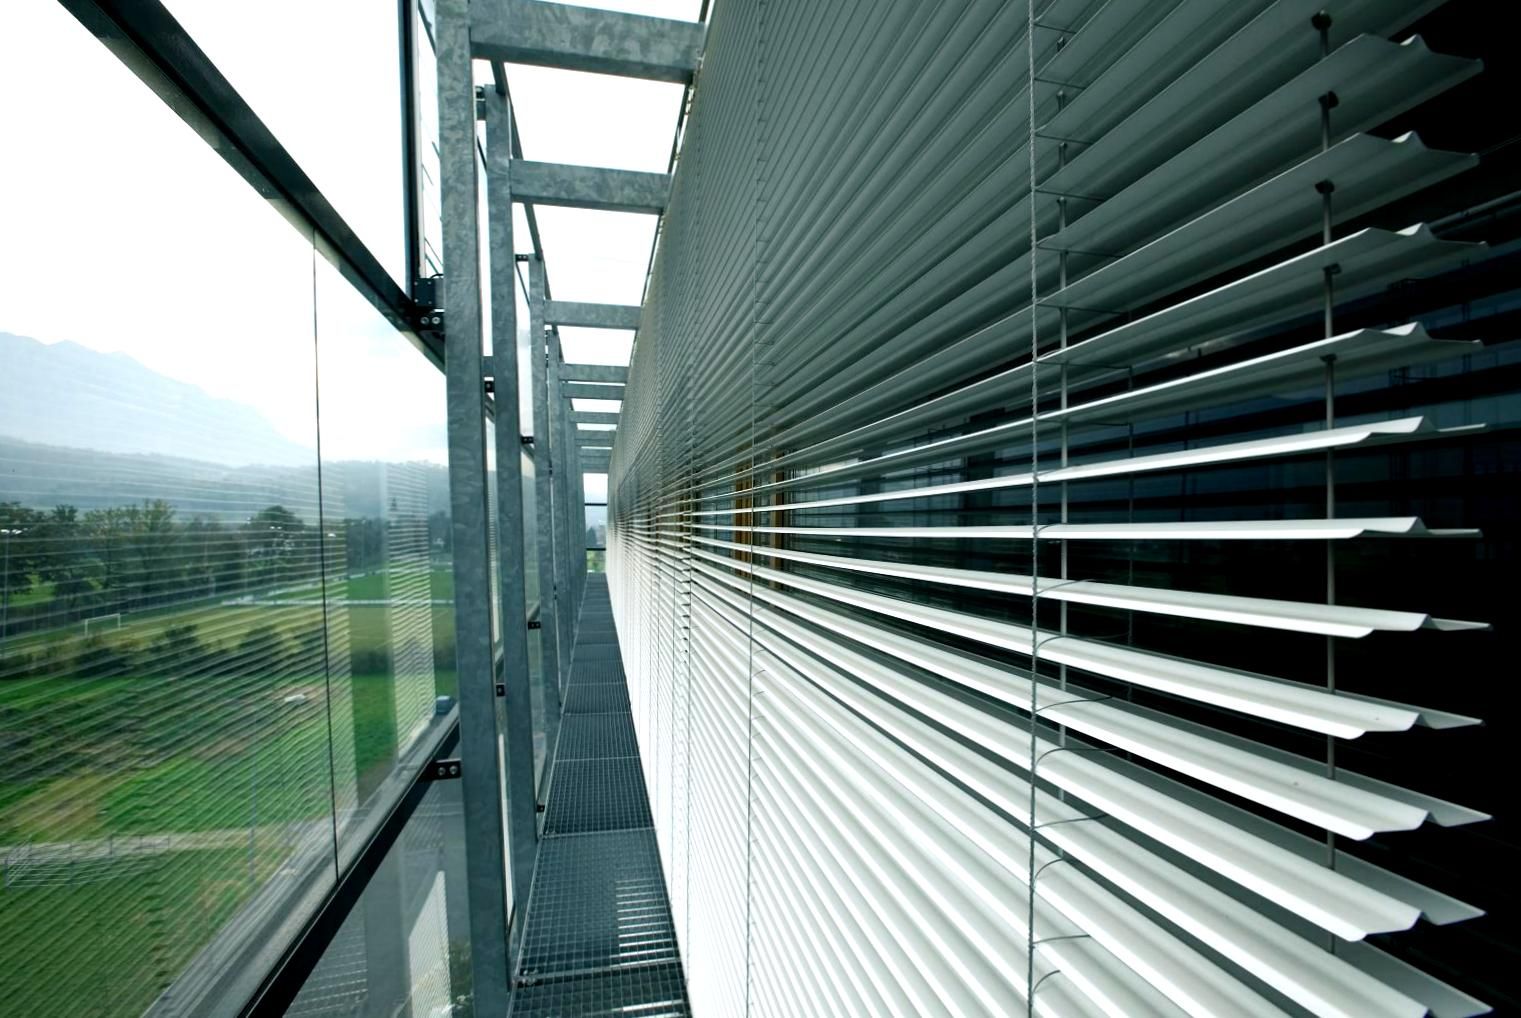 Daylight guidance blinds installed on the side of a commercial building